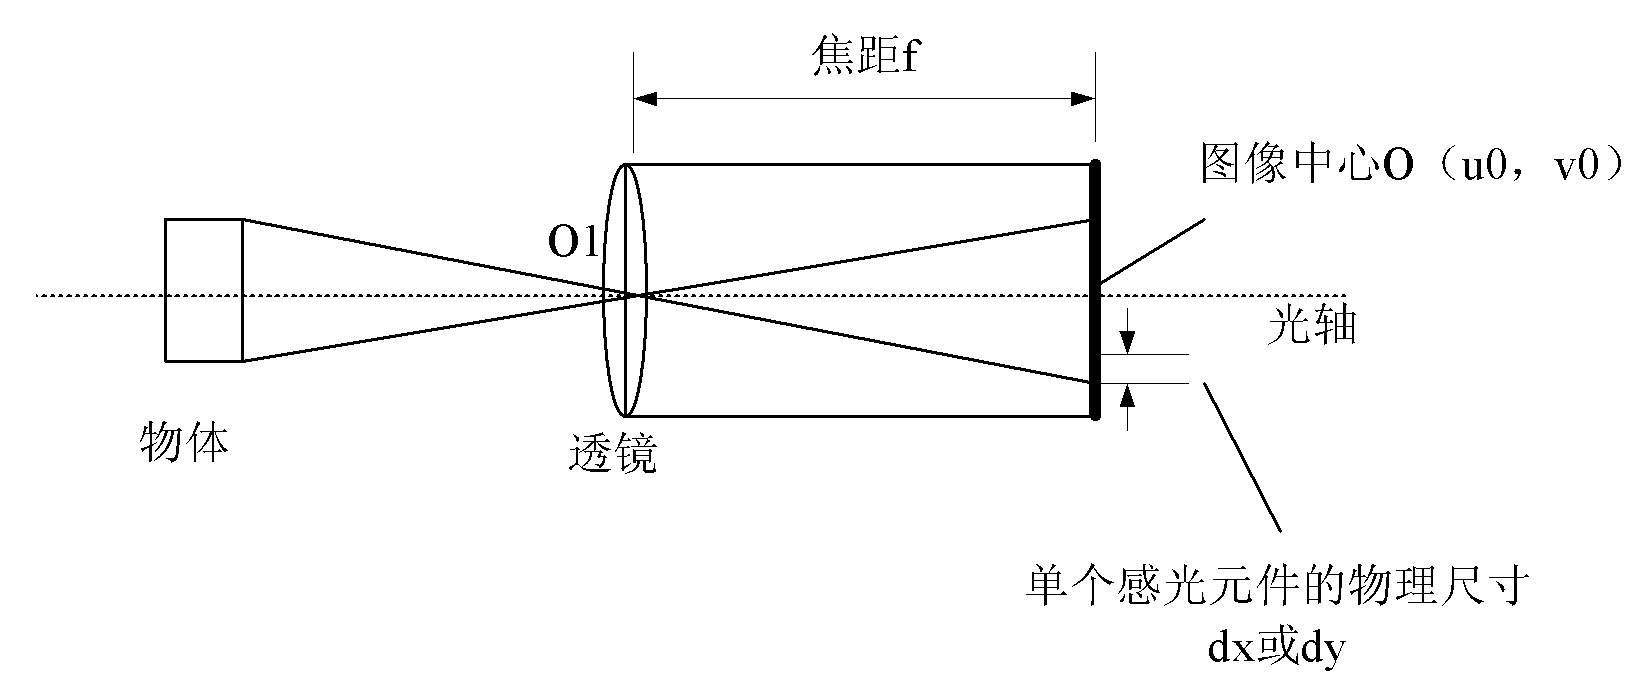 Field calibration and precision measurement method for spot laser measuring system